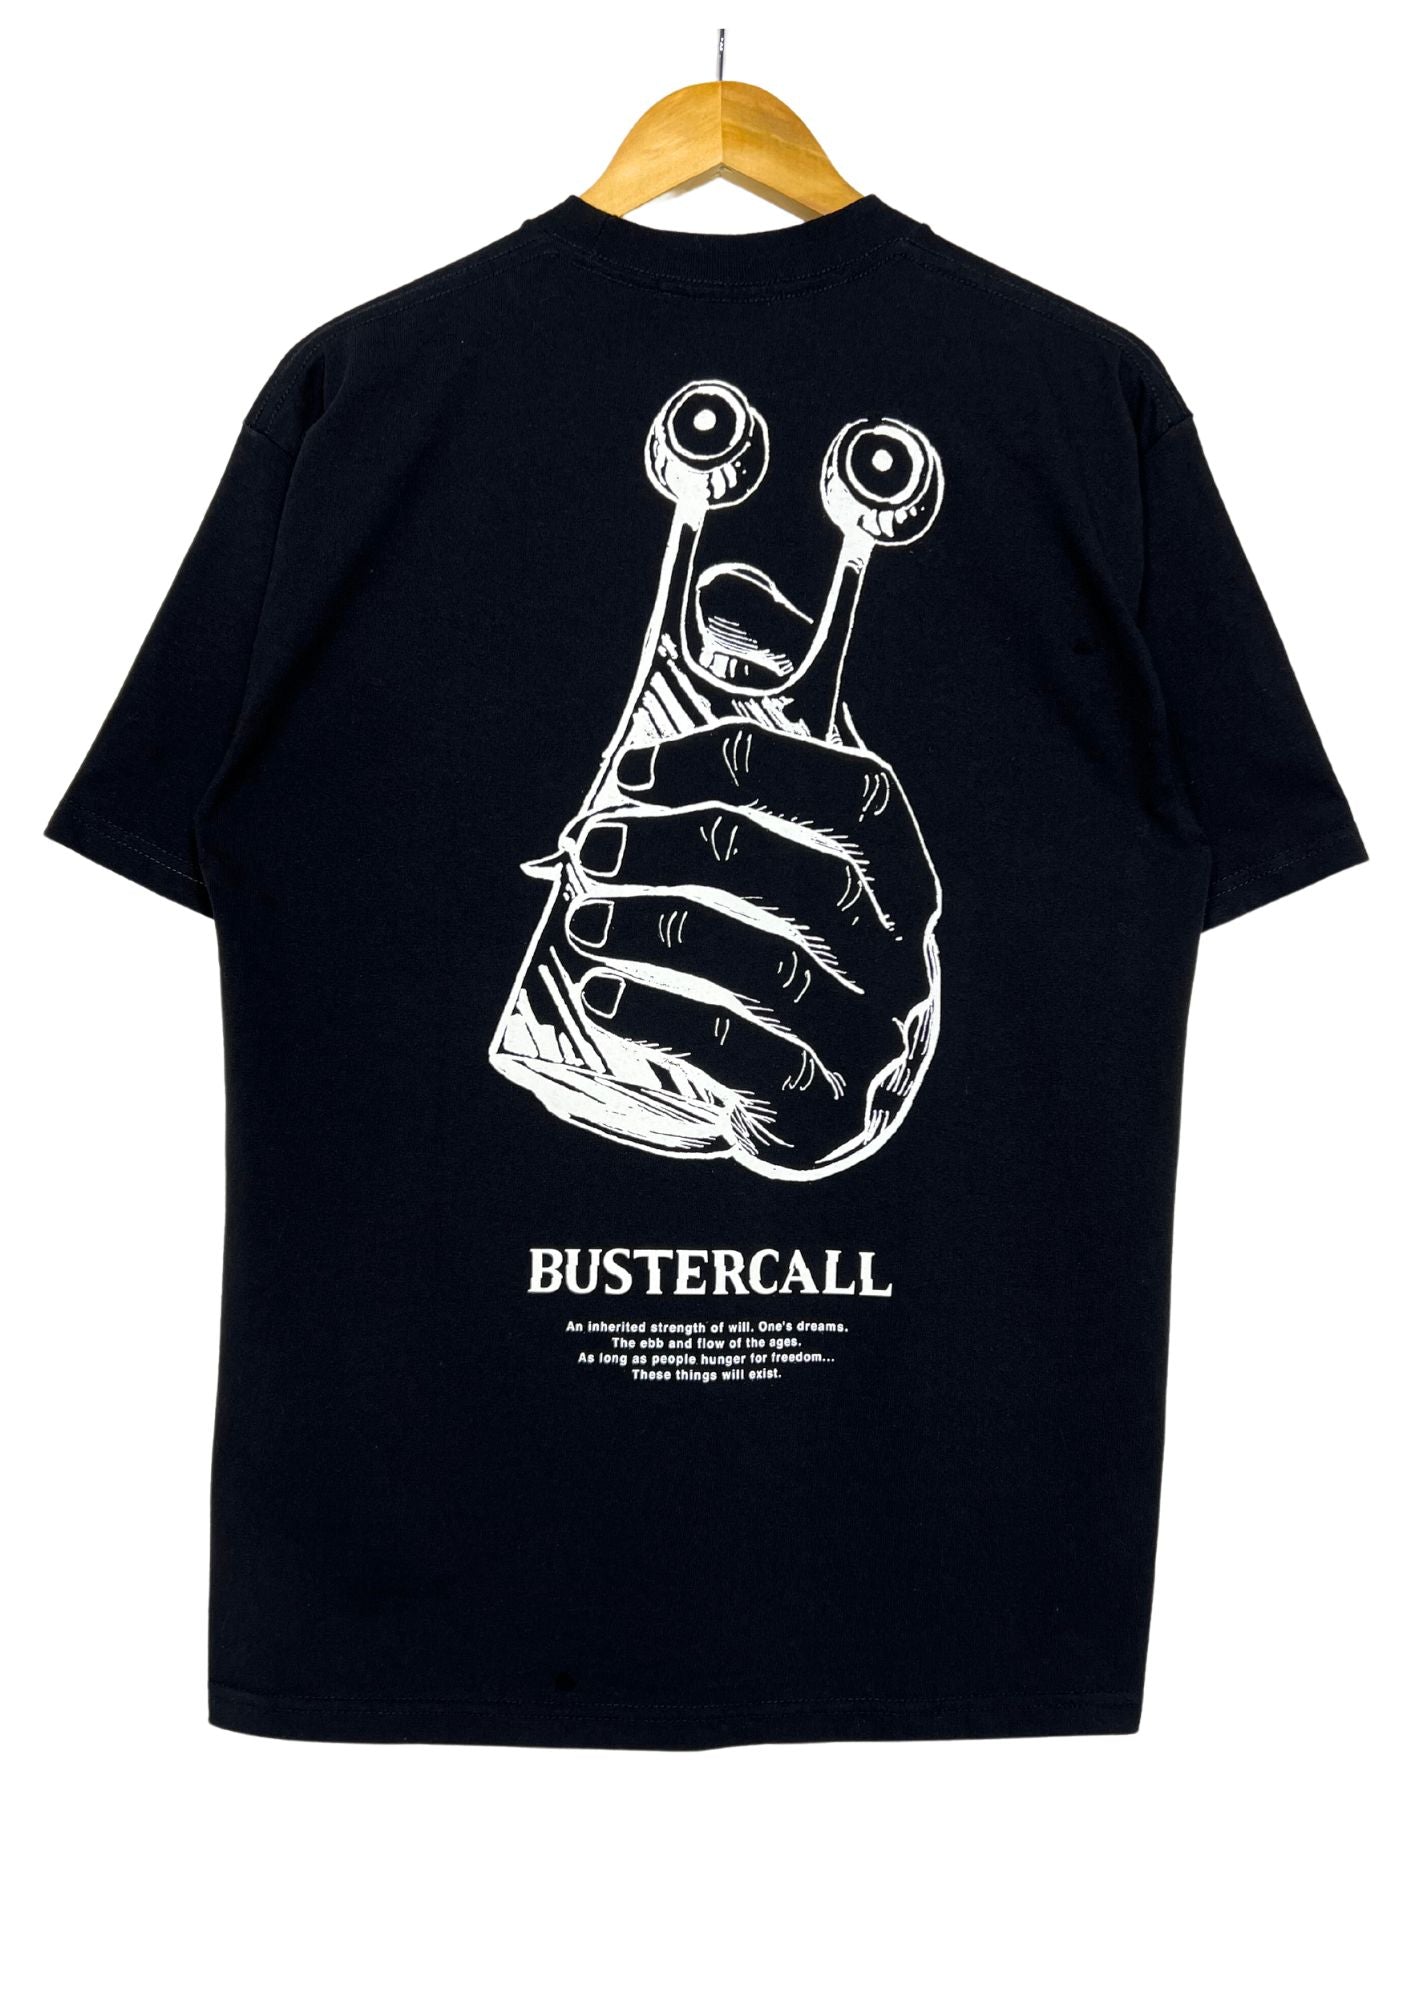 2020 One Piece x BUSTERCALL Exhibition Limited T-shirt